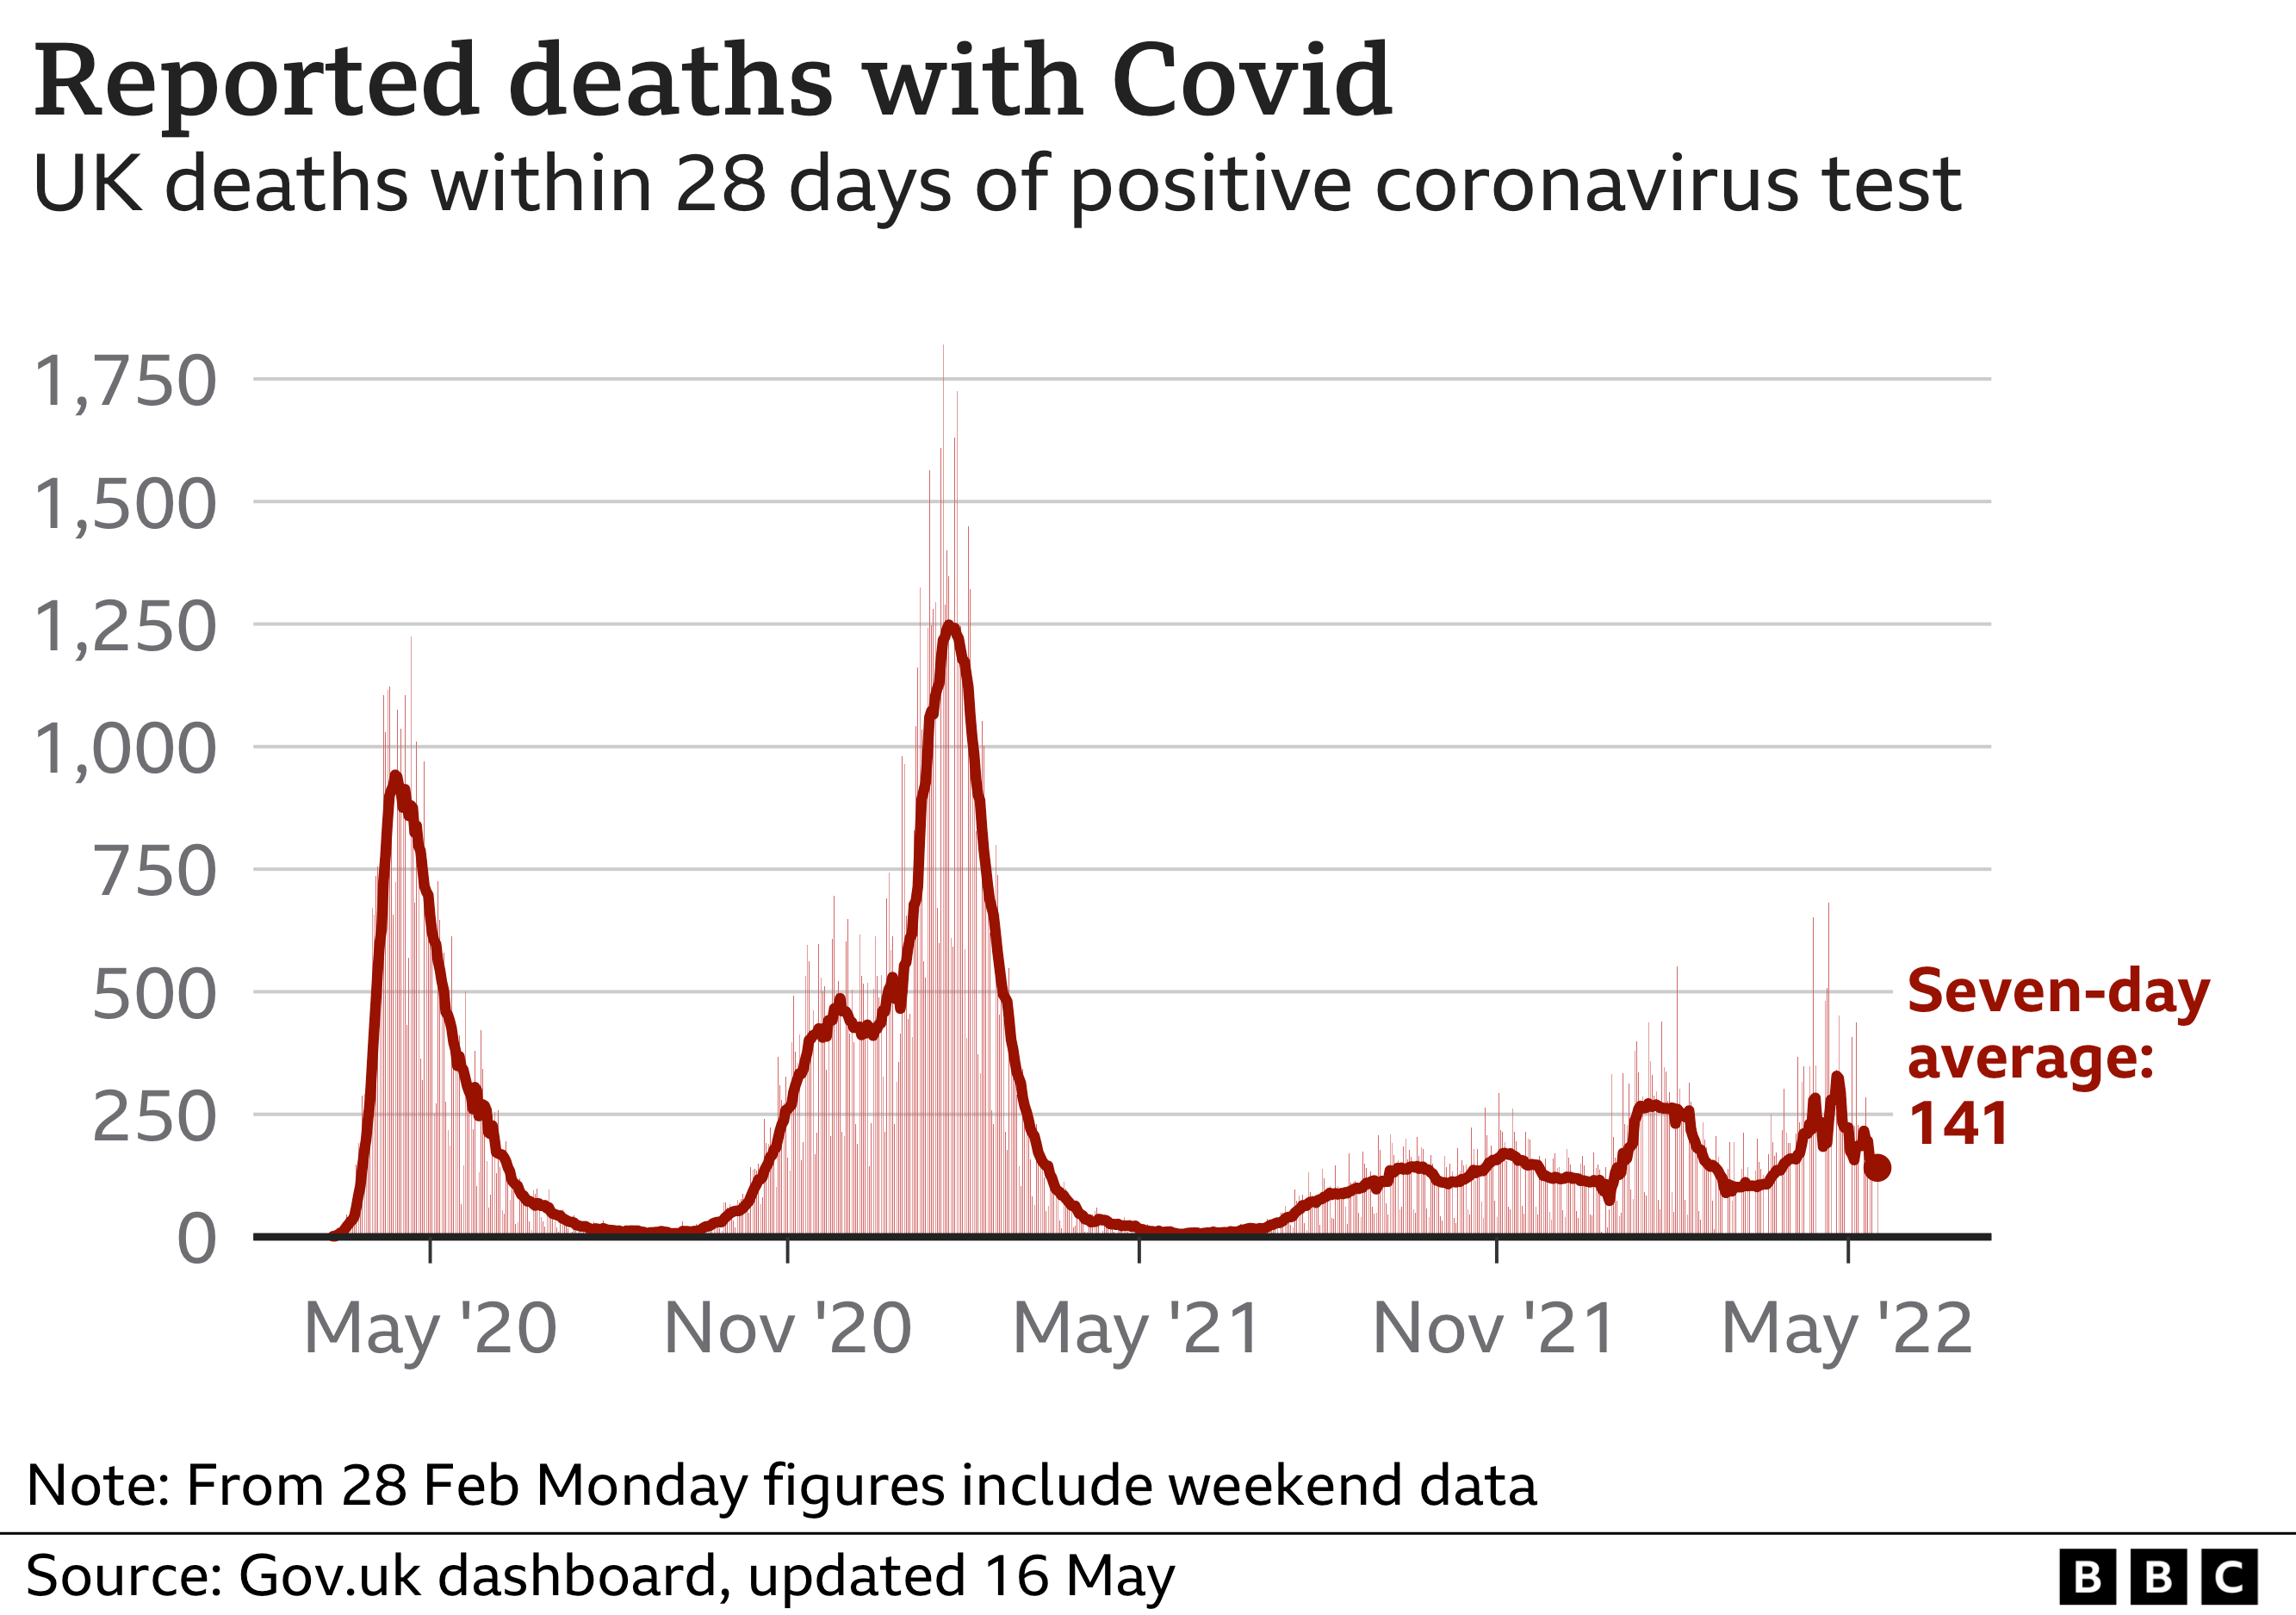 chart showing reported deaths with Covid